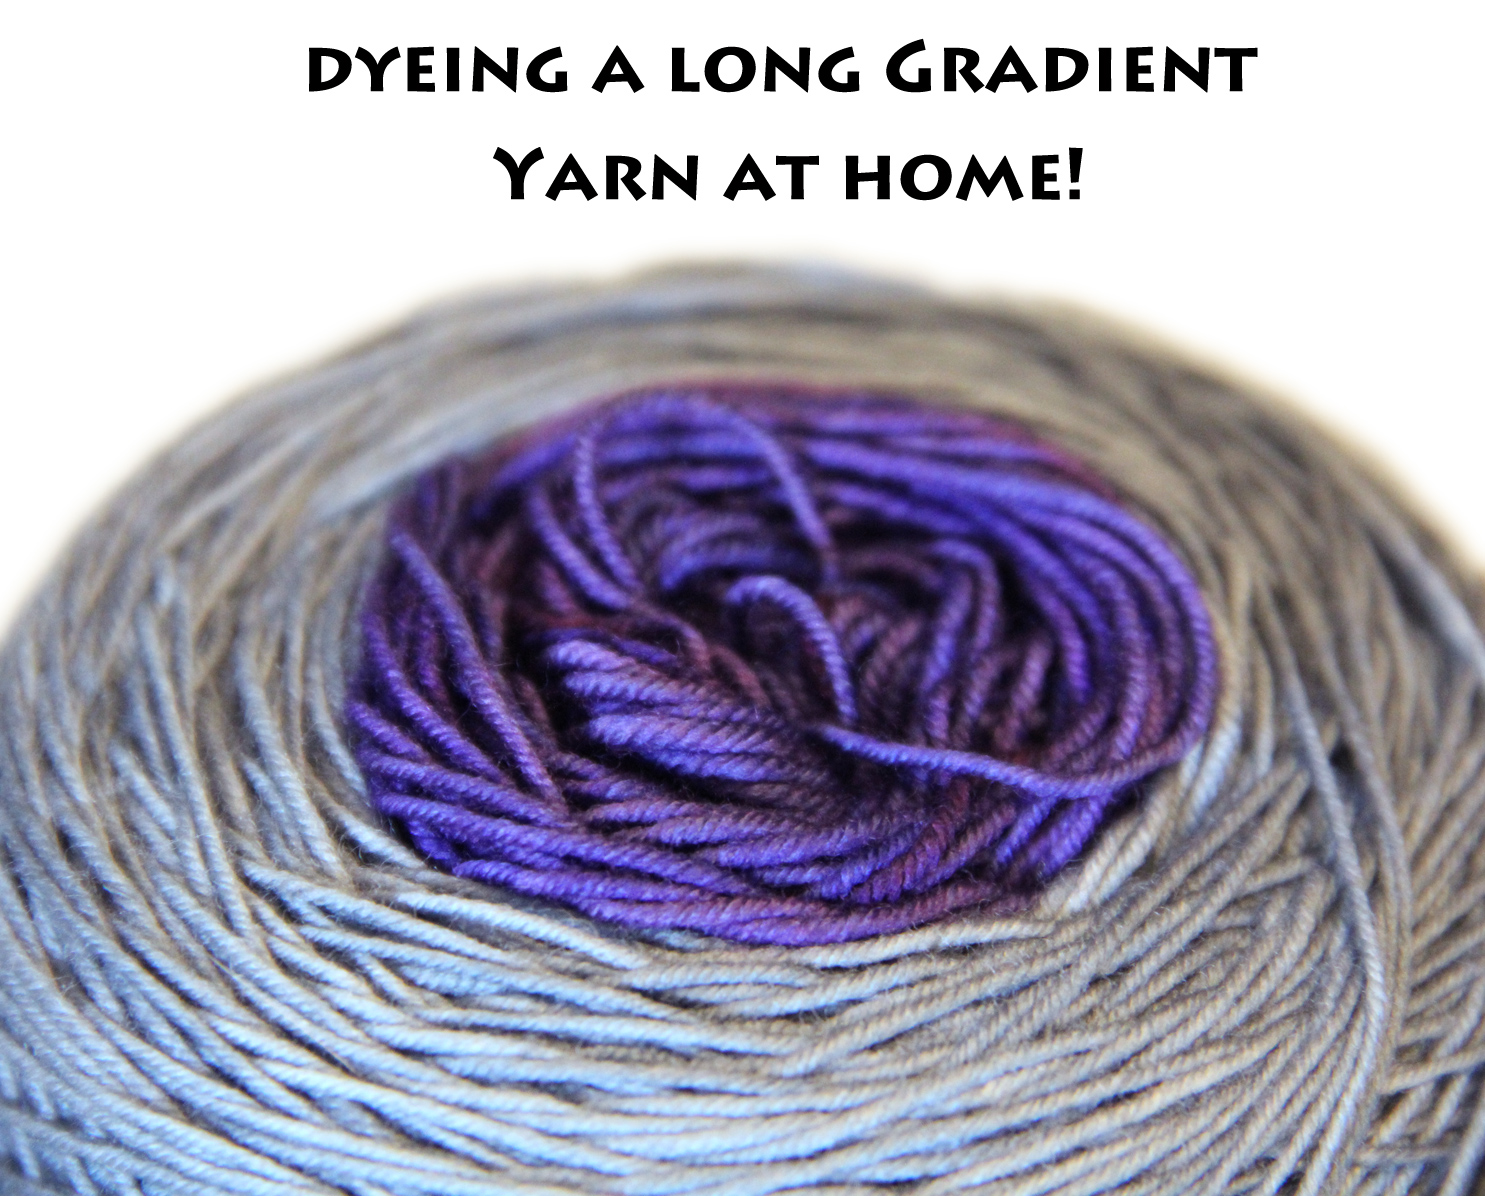 Dyeing a Long Gradient Yarn at Home with Food Dye!